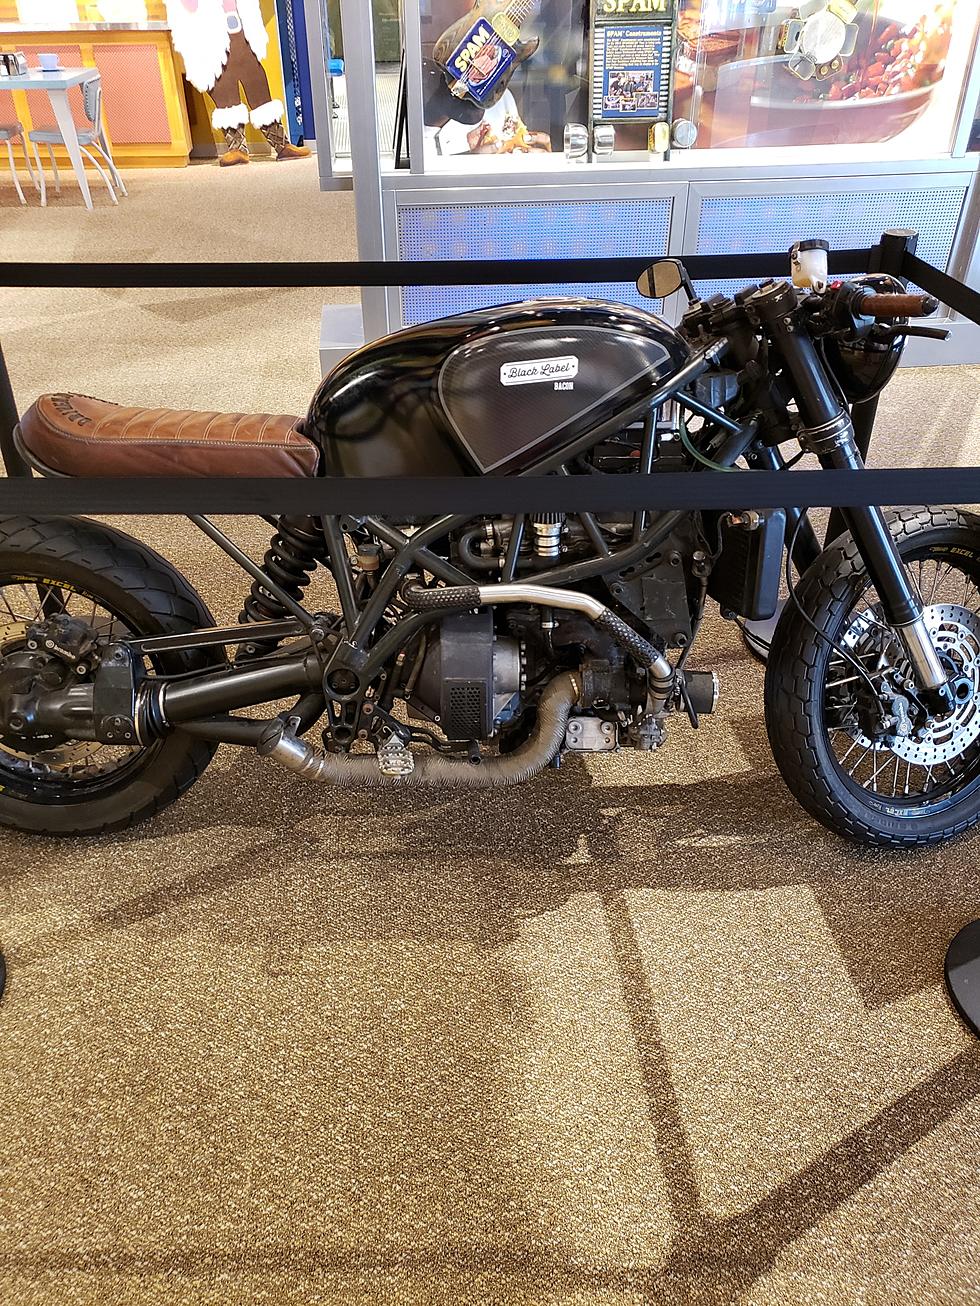 Minnesota is Home to the World’s First Bacon-Powered Motorcycle